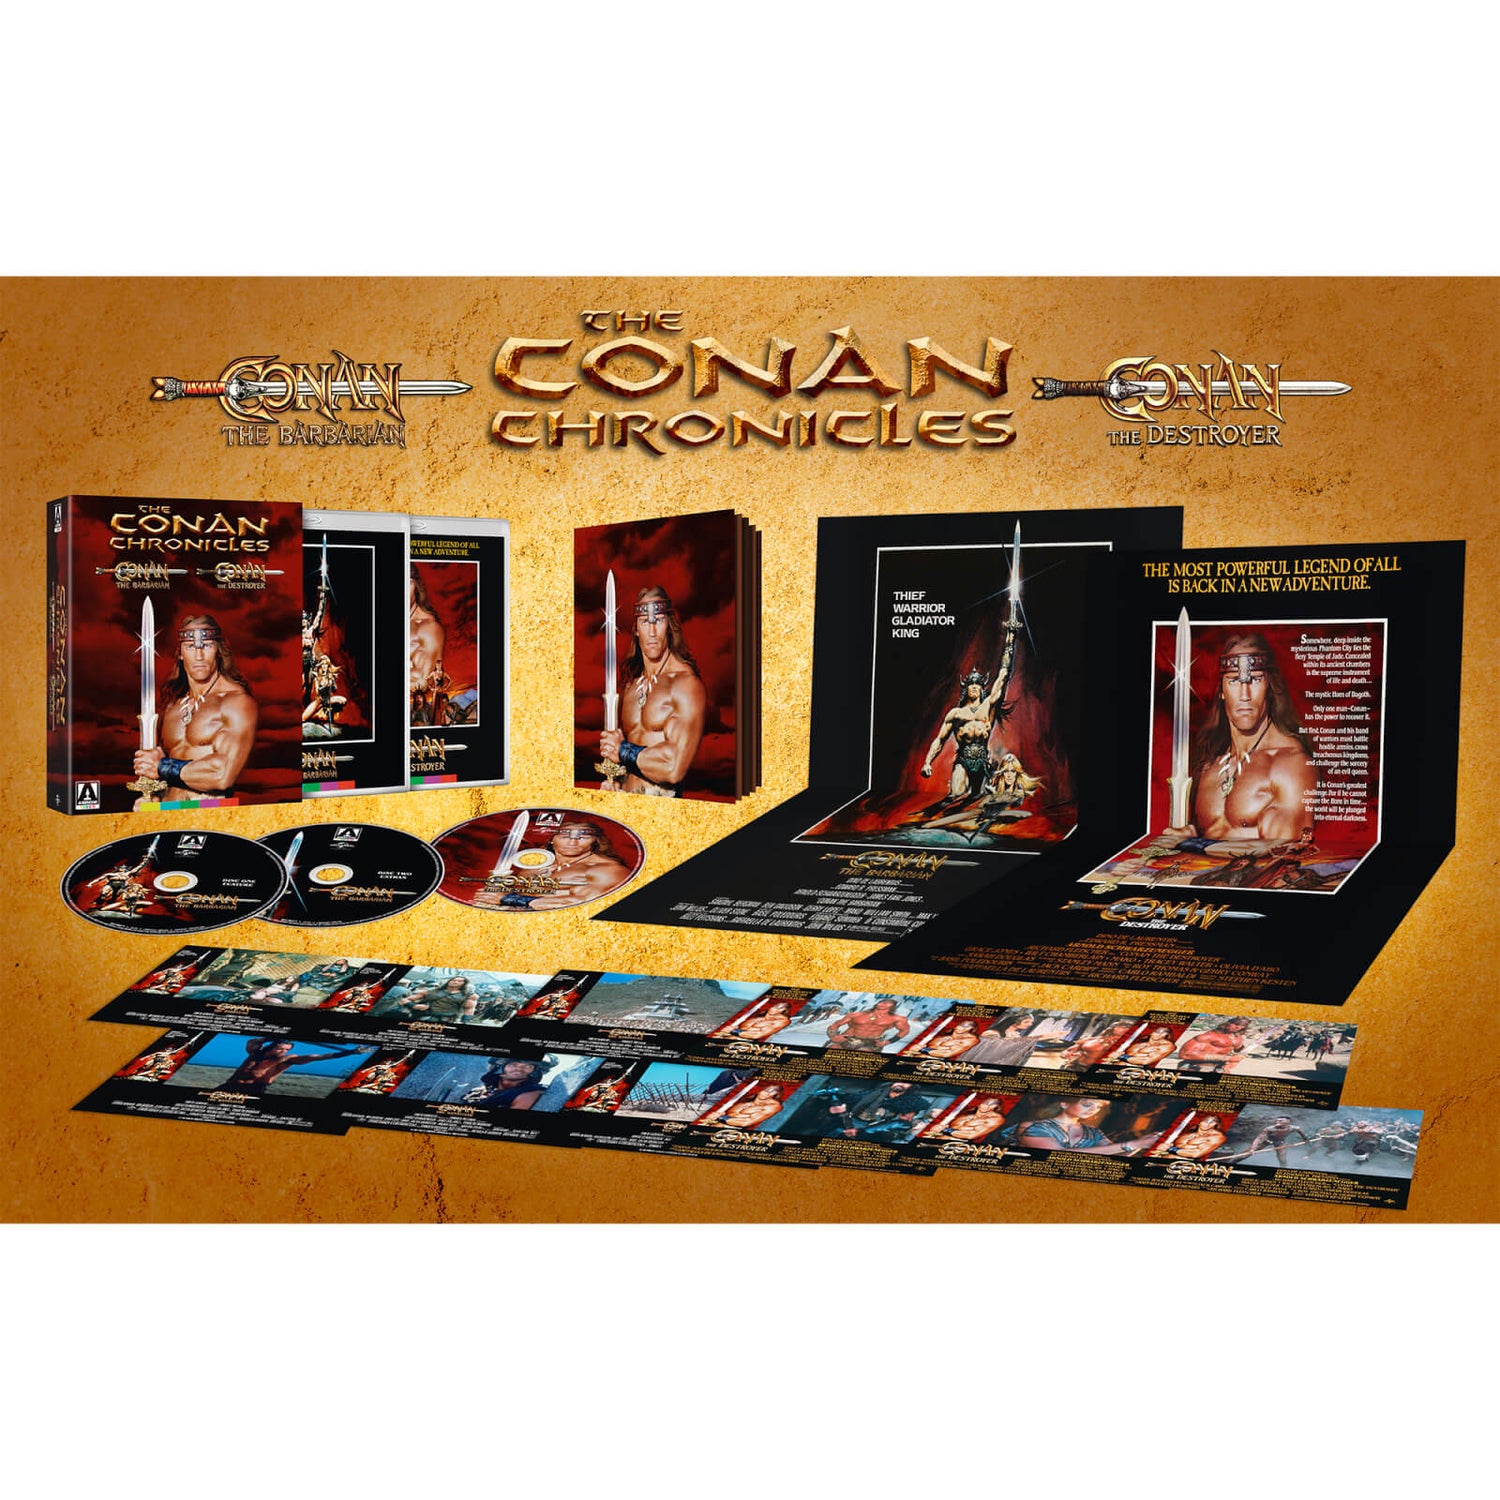 The Conan Chronicles: Conan The Barbarian & Conan The Destroyer Limited Edition Blu-ray